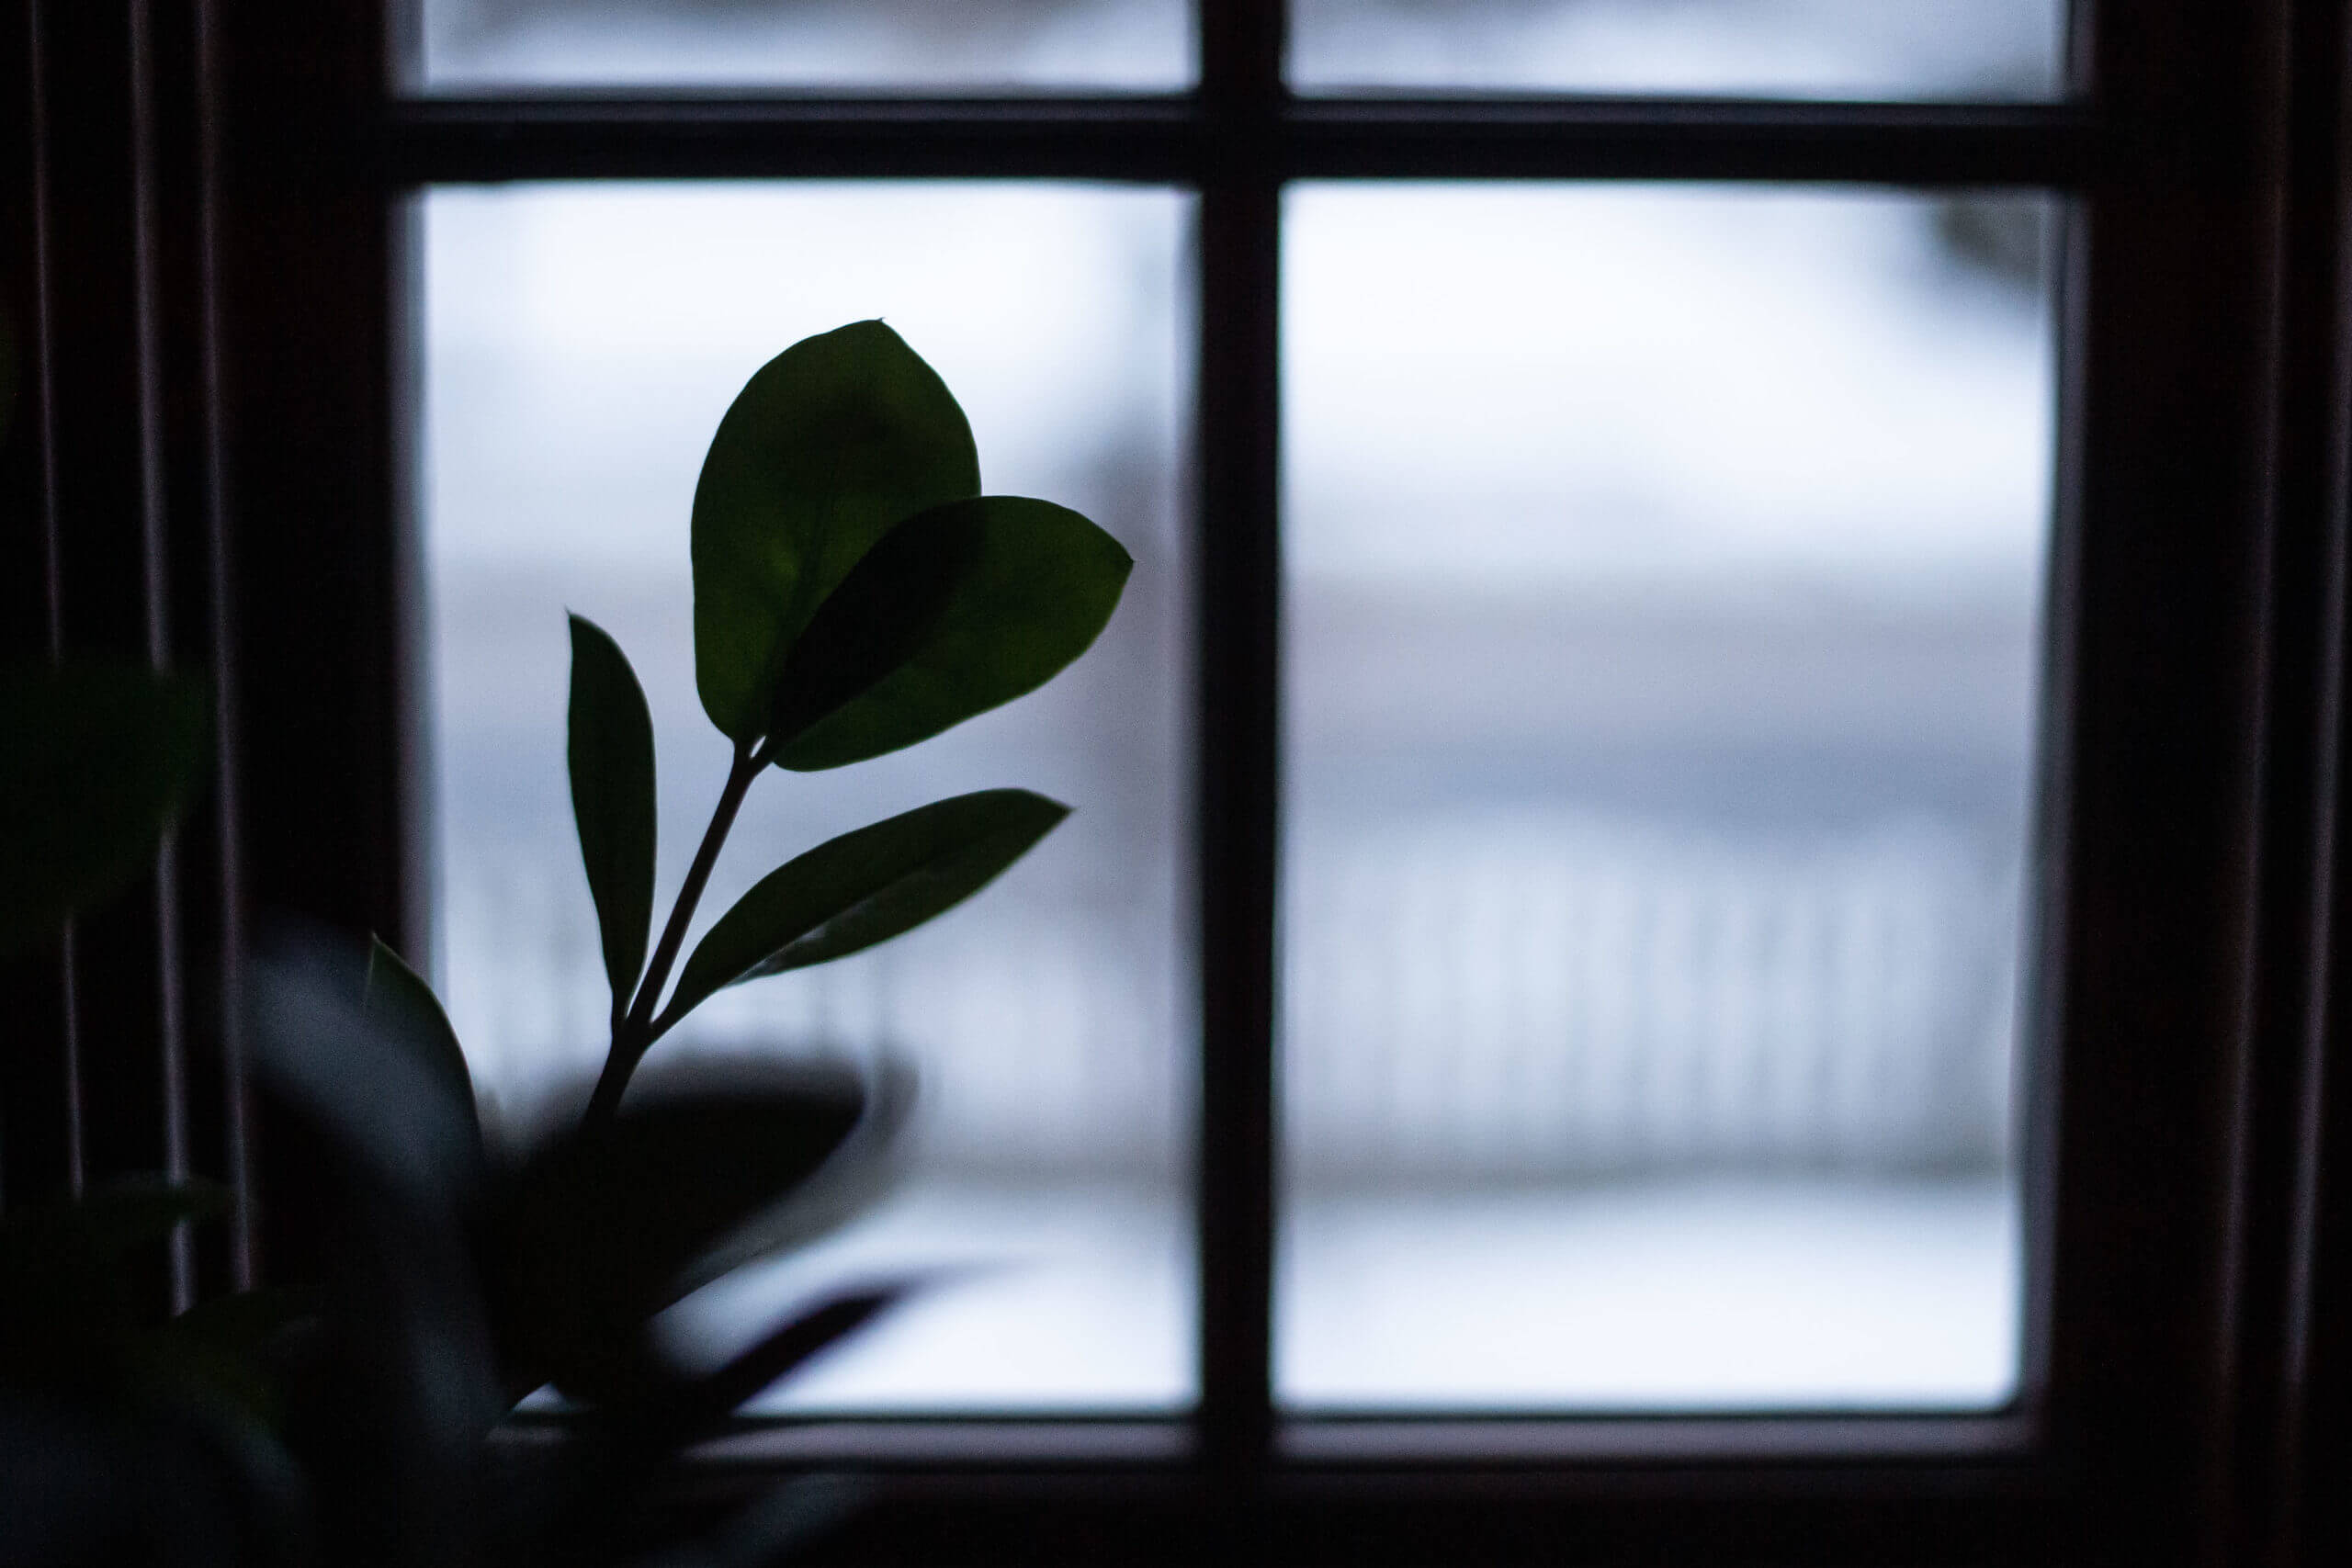 Dark color image of a plant silhouetted in the pane of a window. The two leaves on the plant make the shape of a heart.